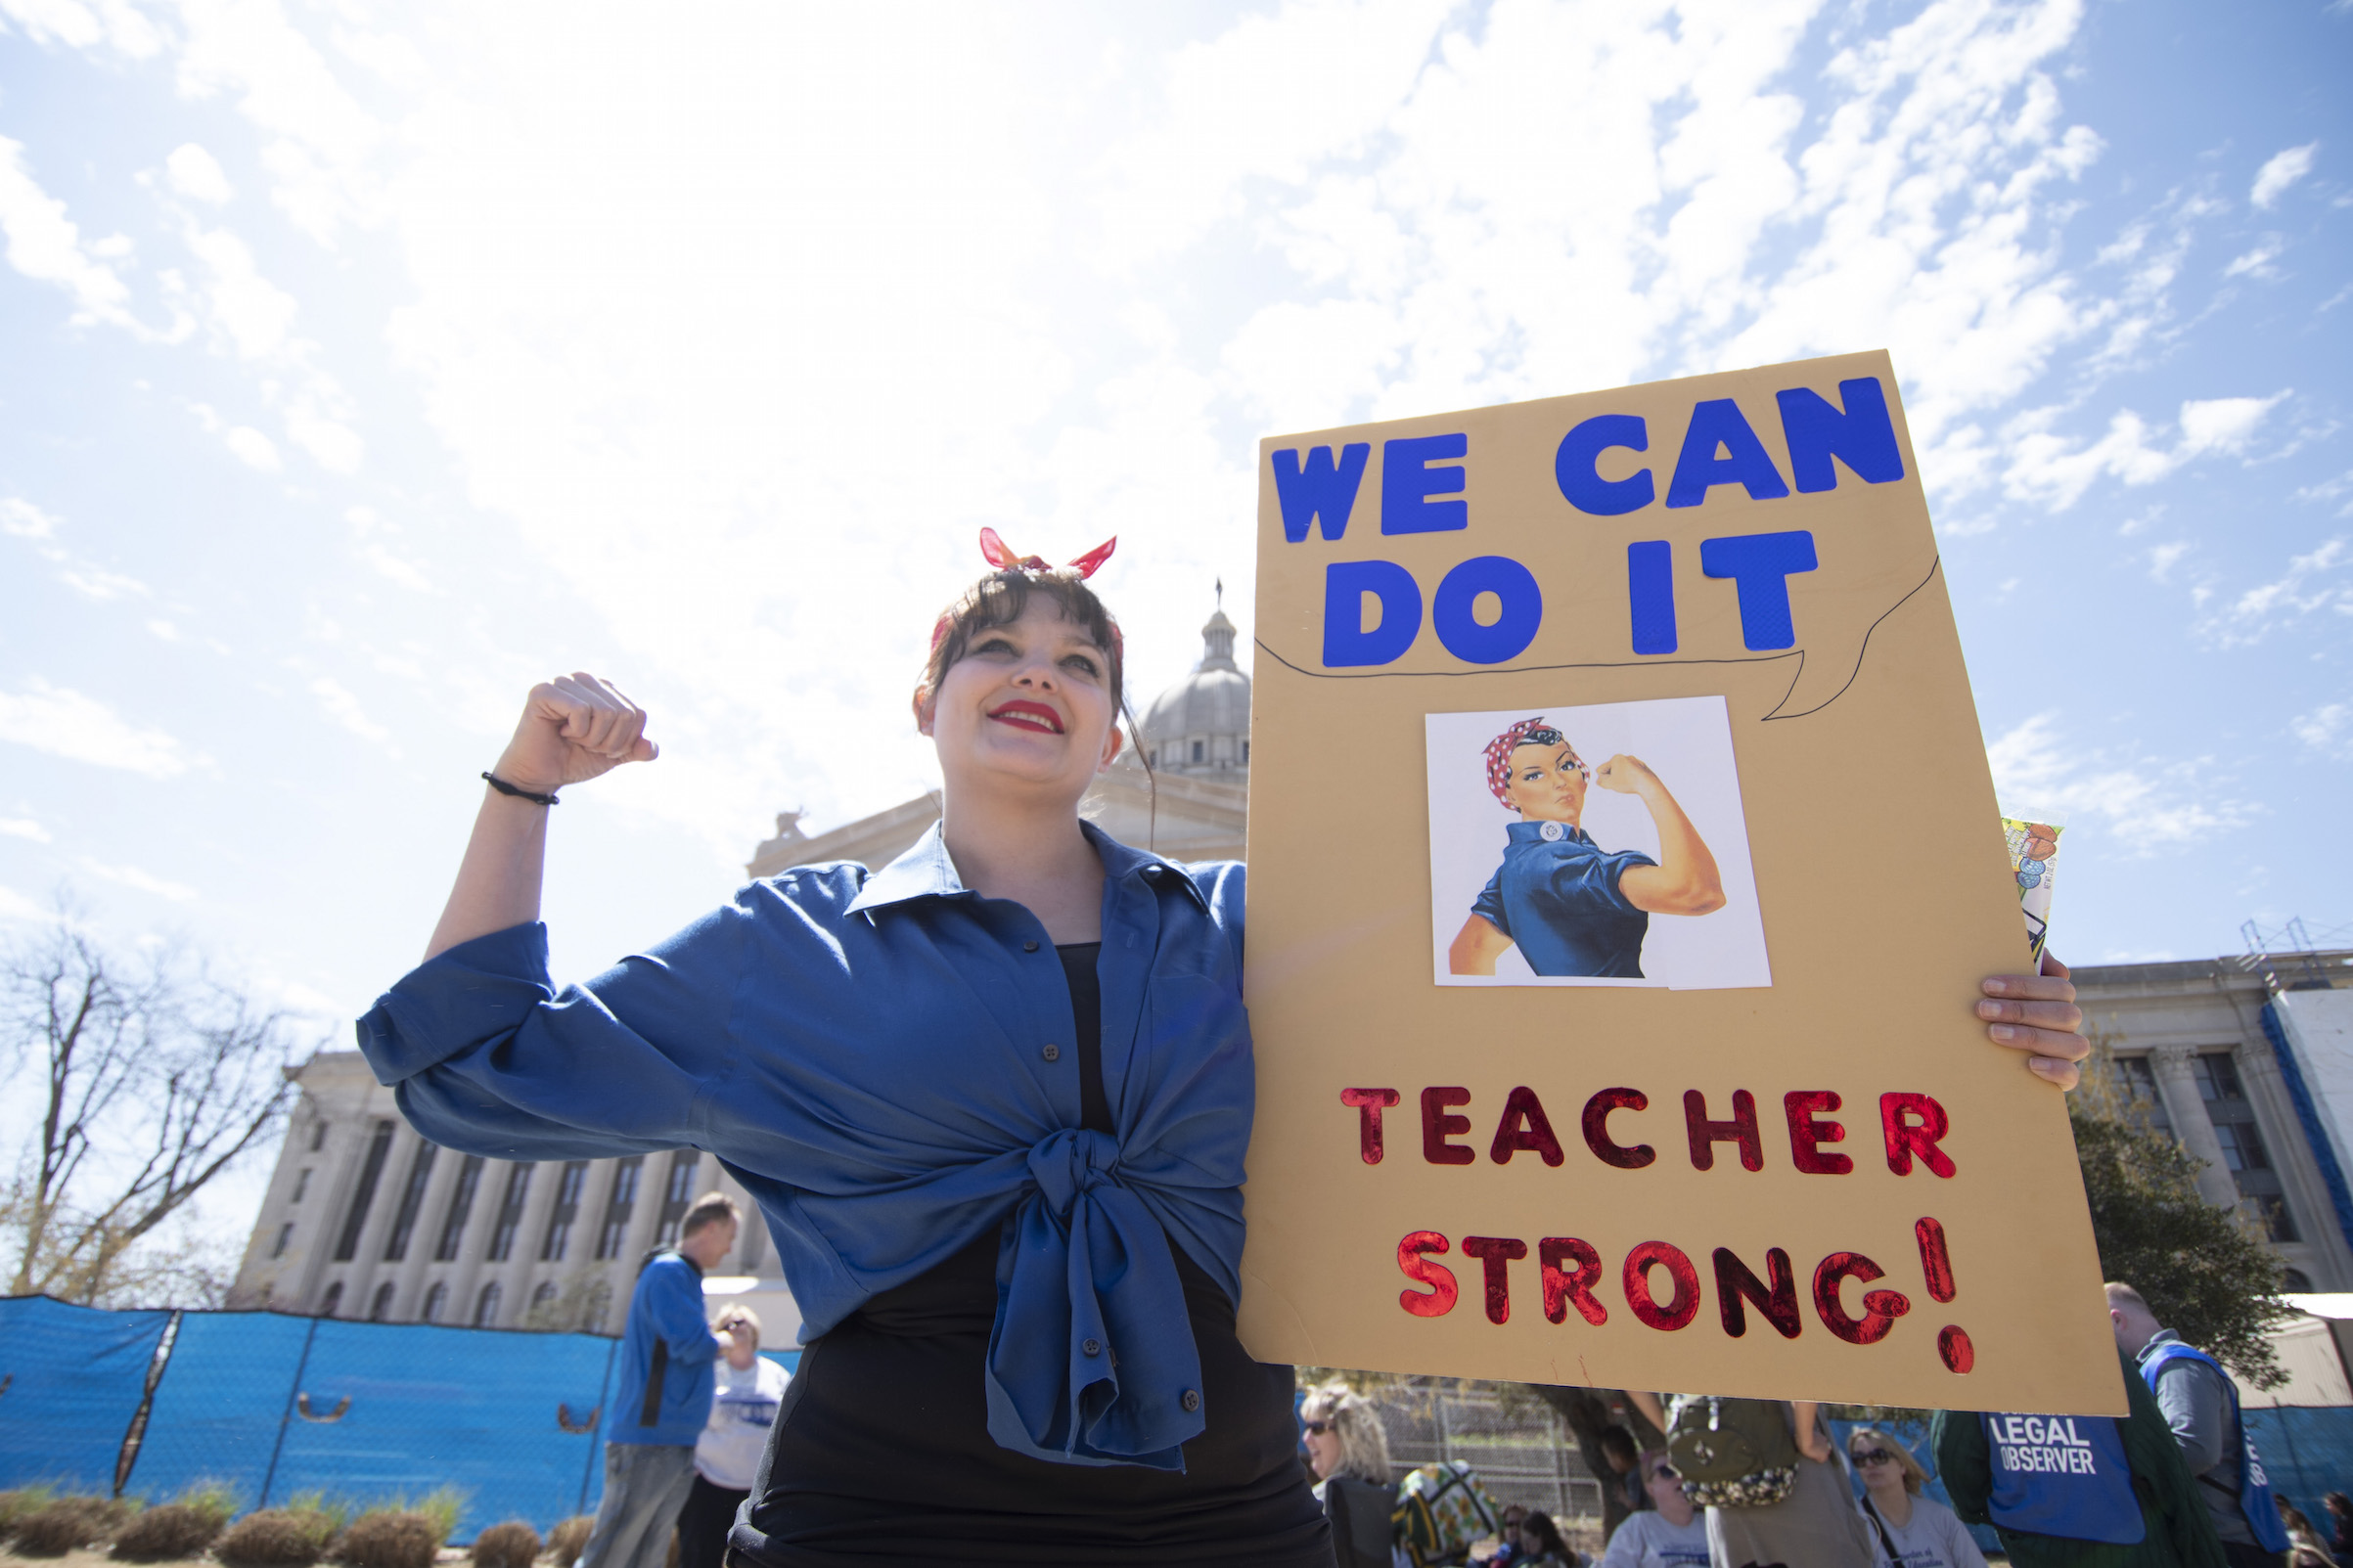 Janelle Cox walks the picket line at the state capitol on April 9, 2018 in Oklahoma City. Thousands of teachers and supporters were expected to rally at the state Capitol at that time. (J Pat Carter—Getty Images)